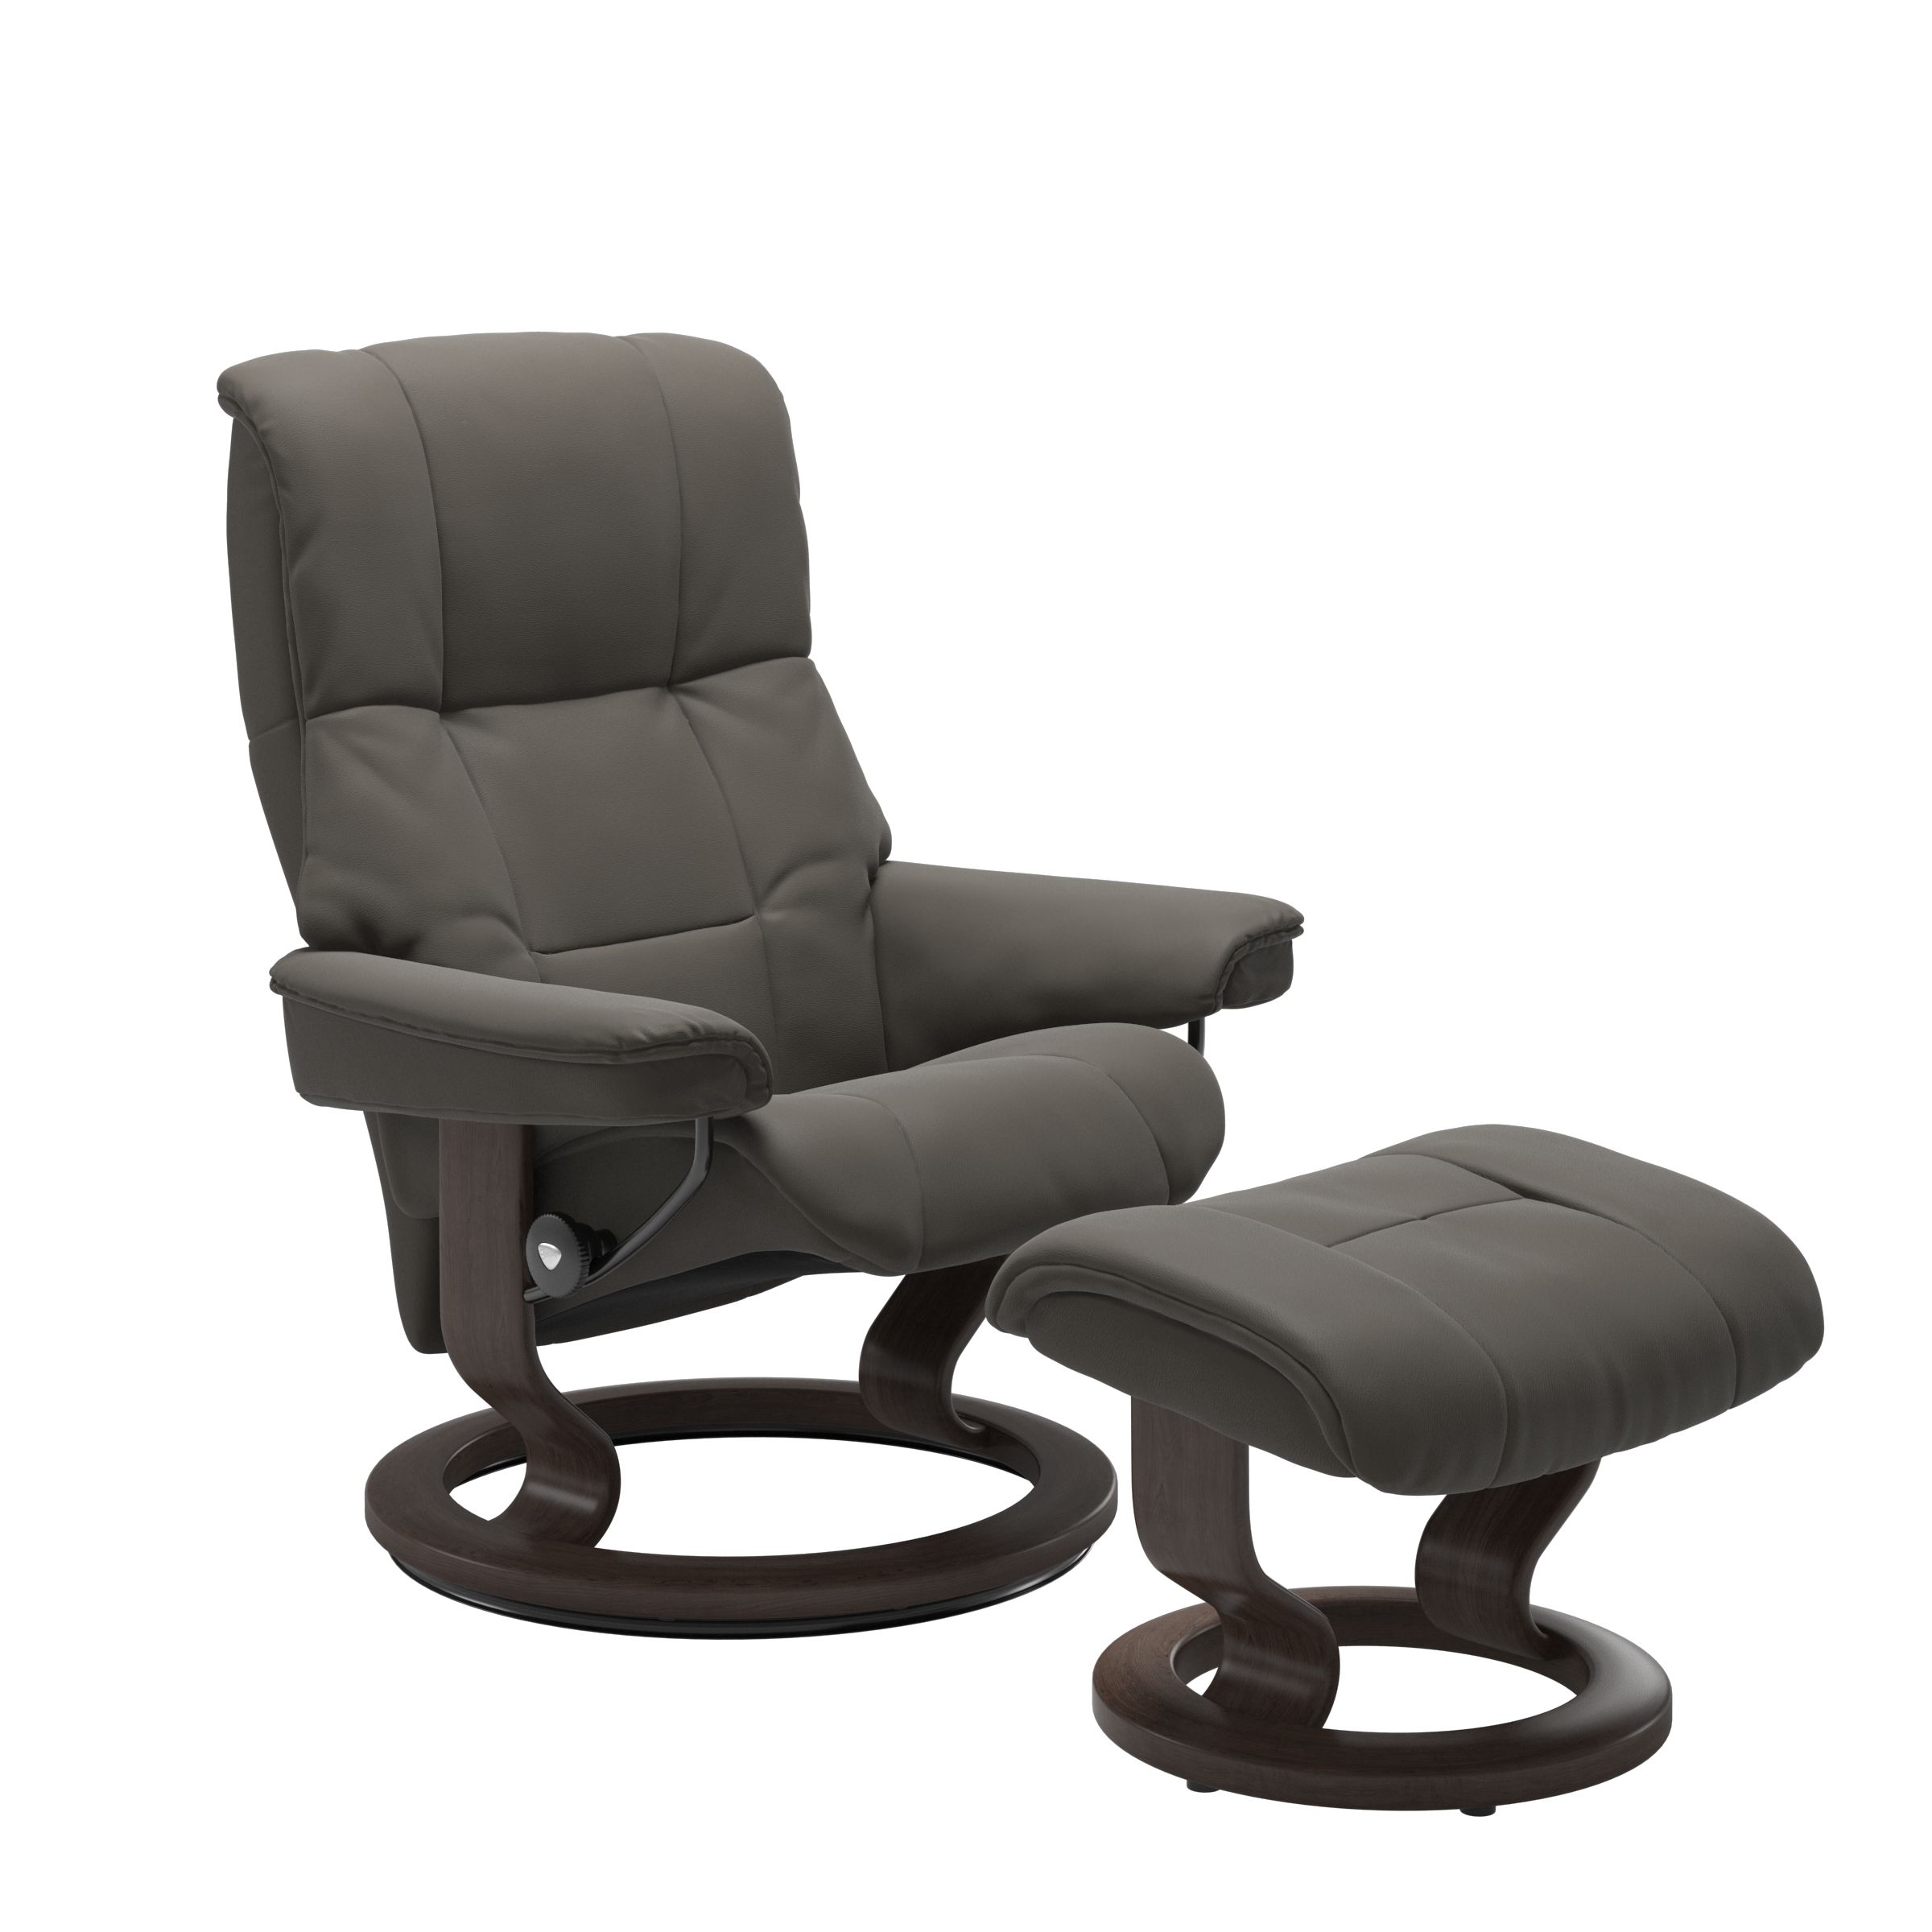 Stressless_Mayfair_Metal_Grey_Leather_Classic